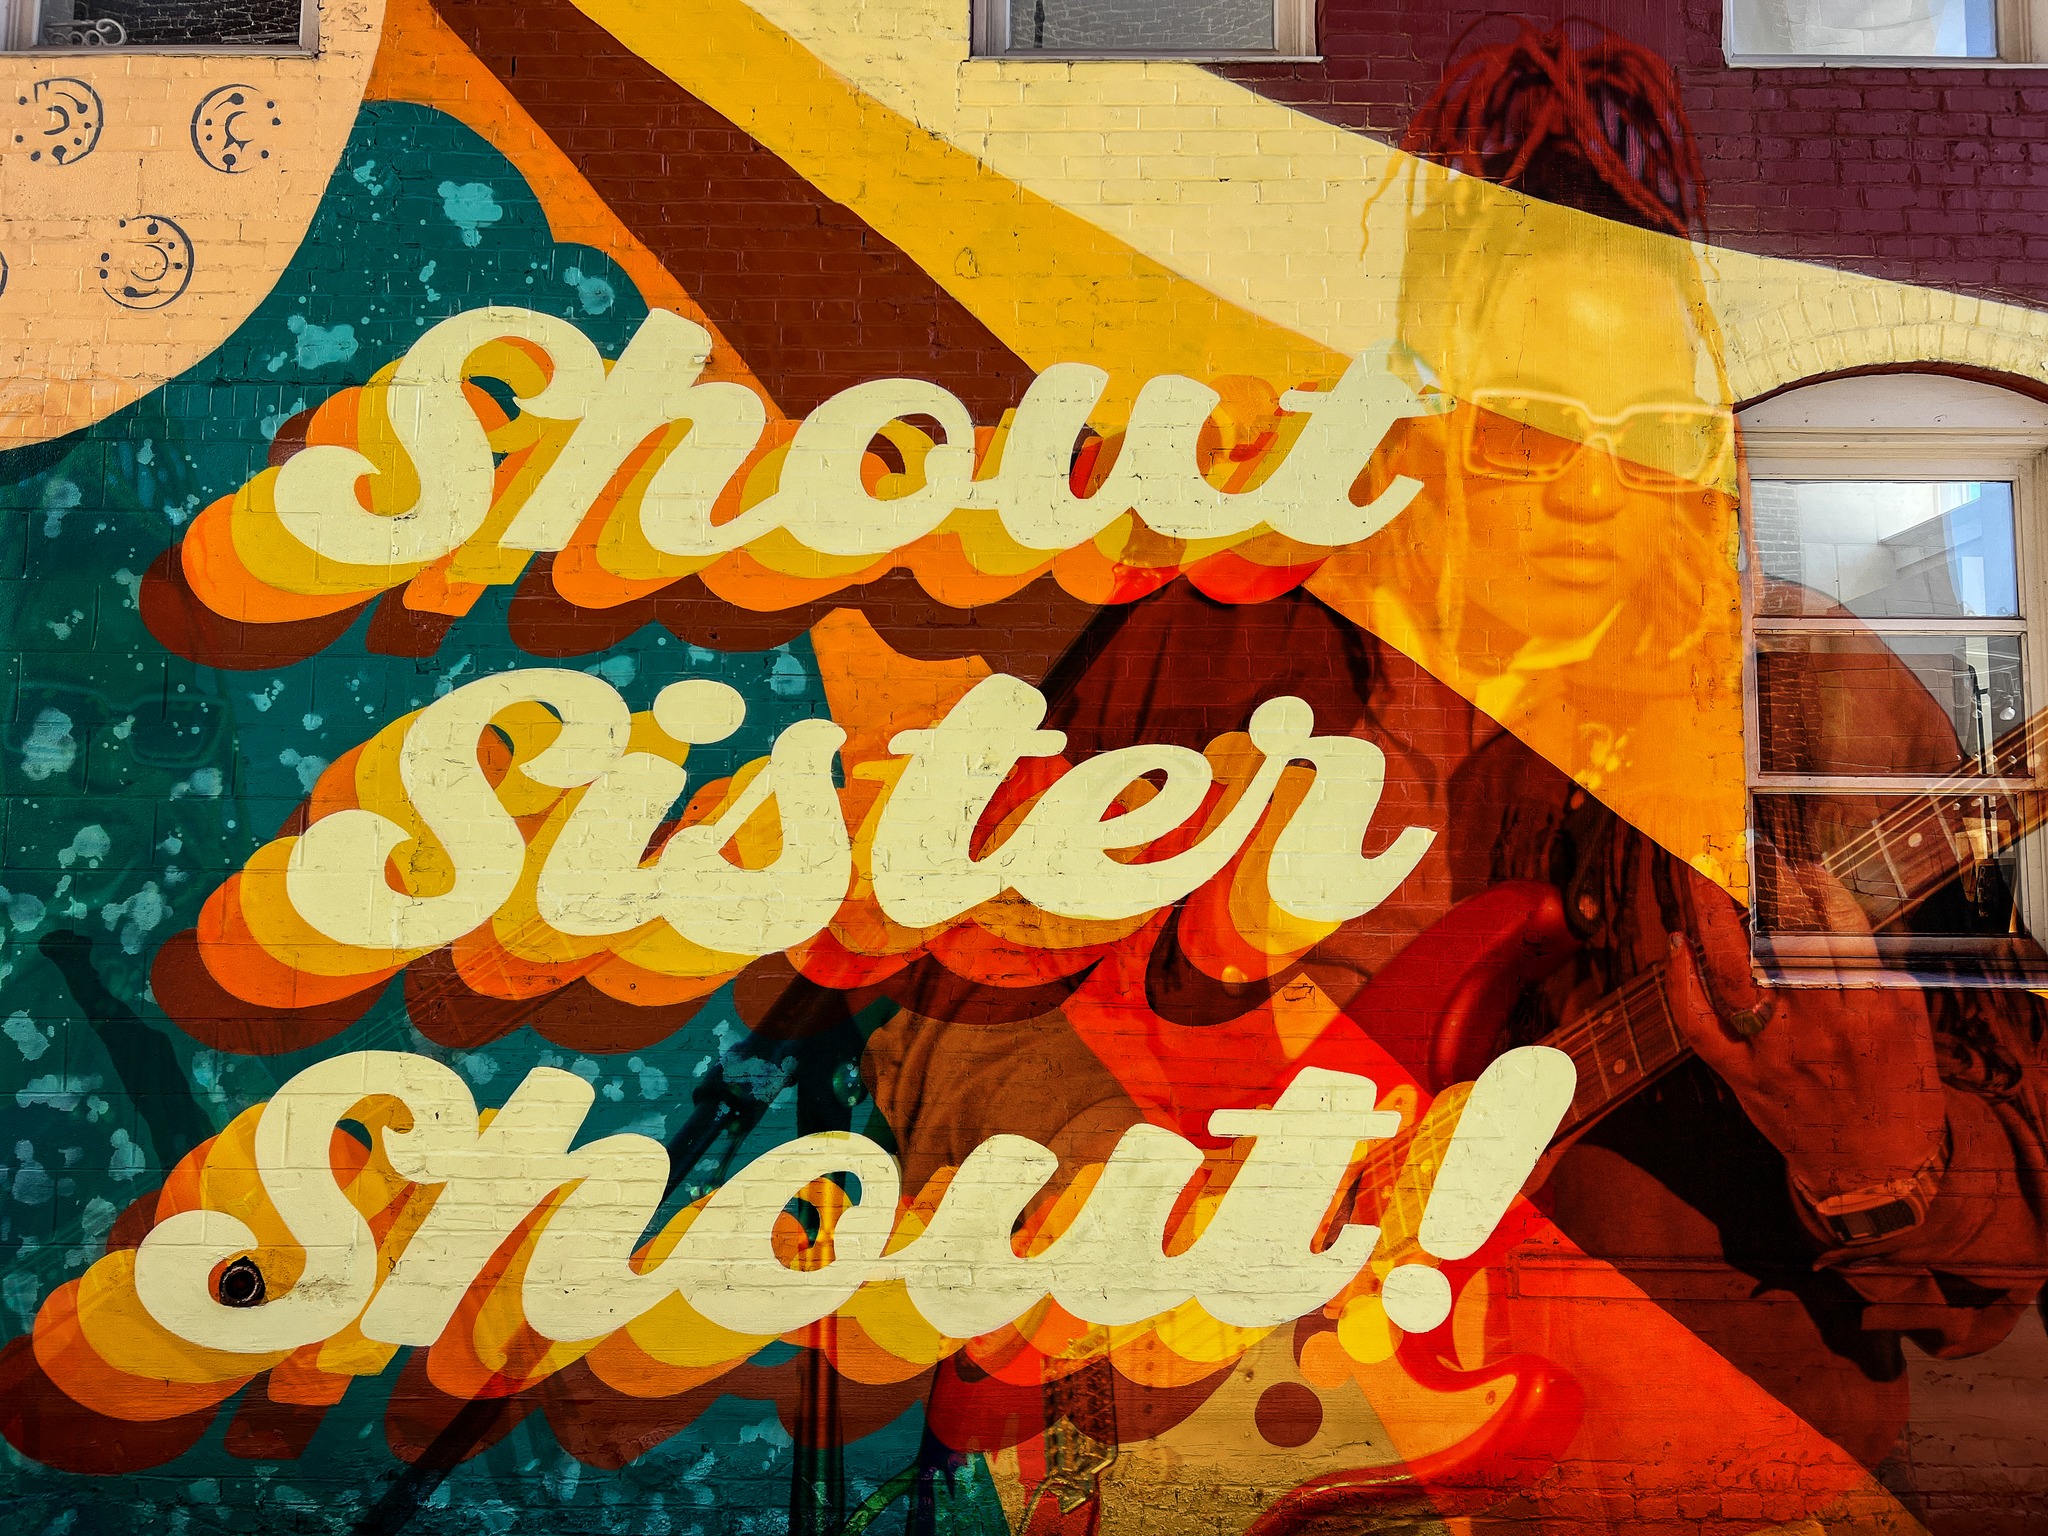 Shout Sister Shout Mural with King Honey Superimposed on image